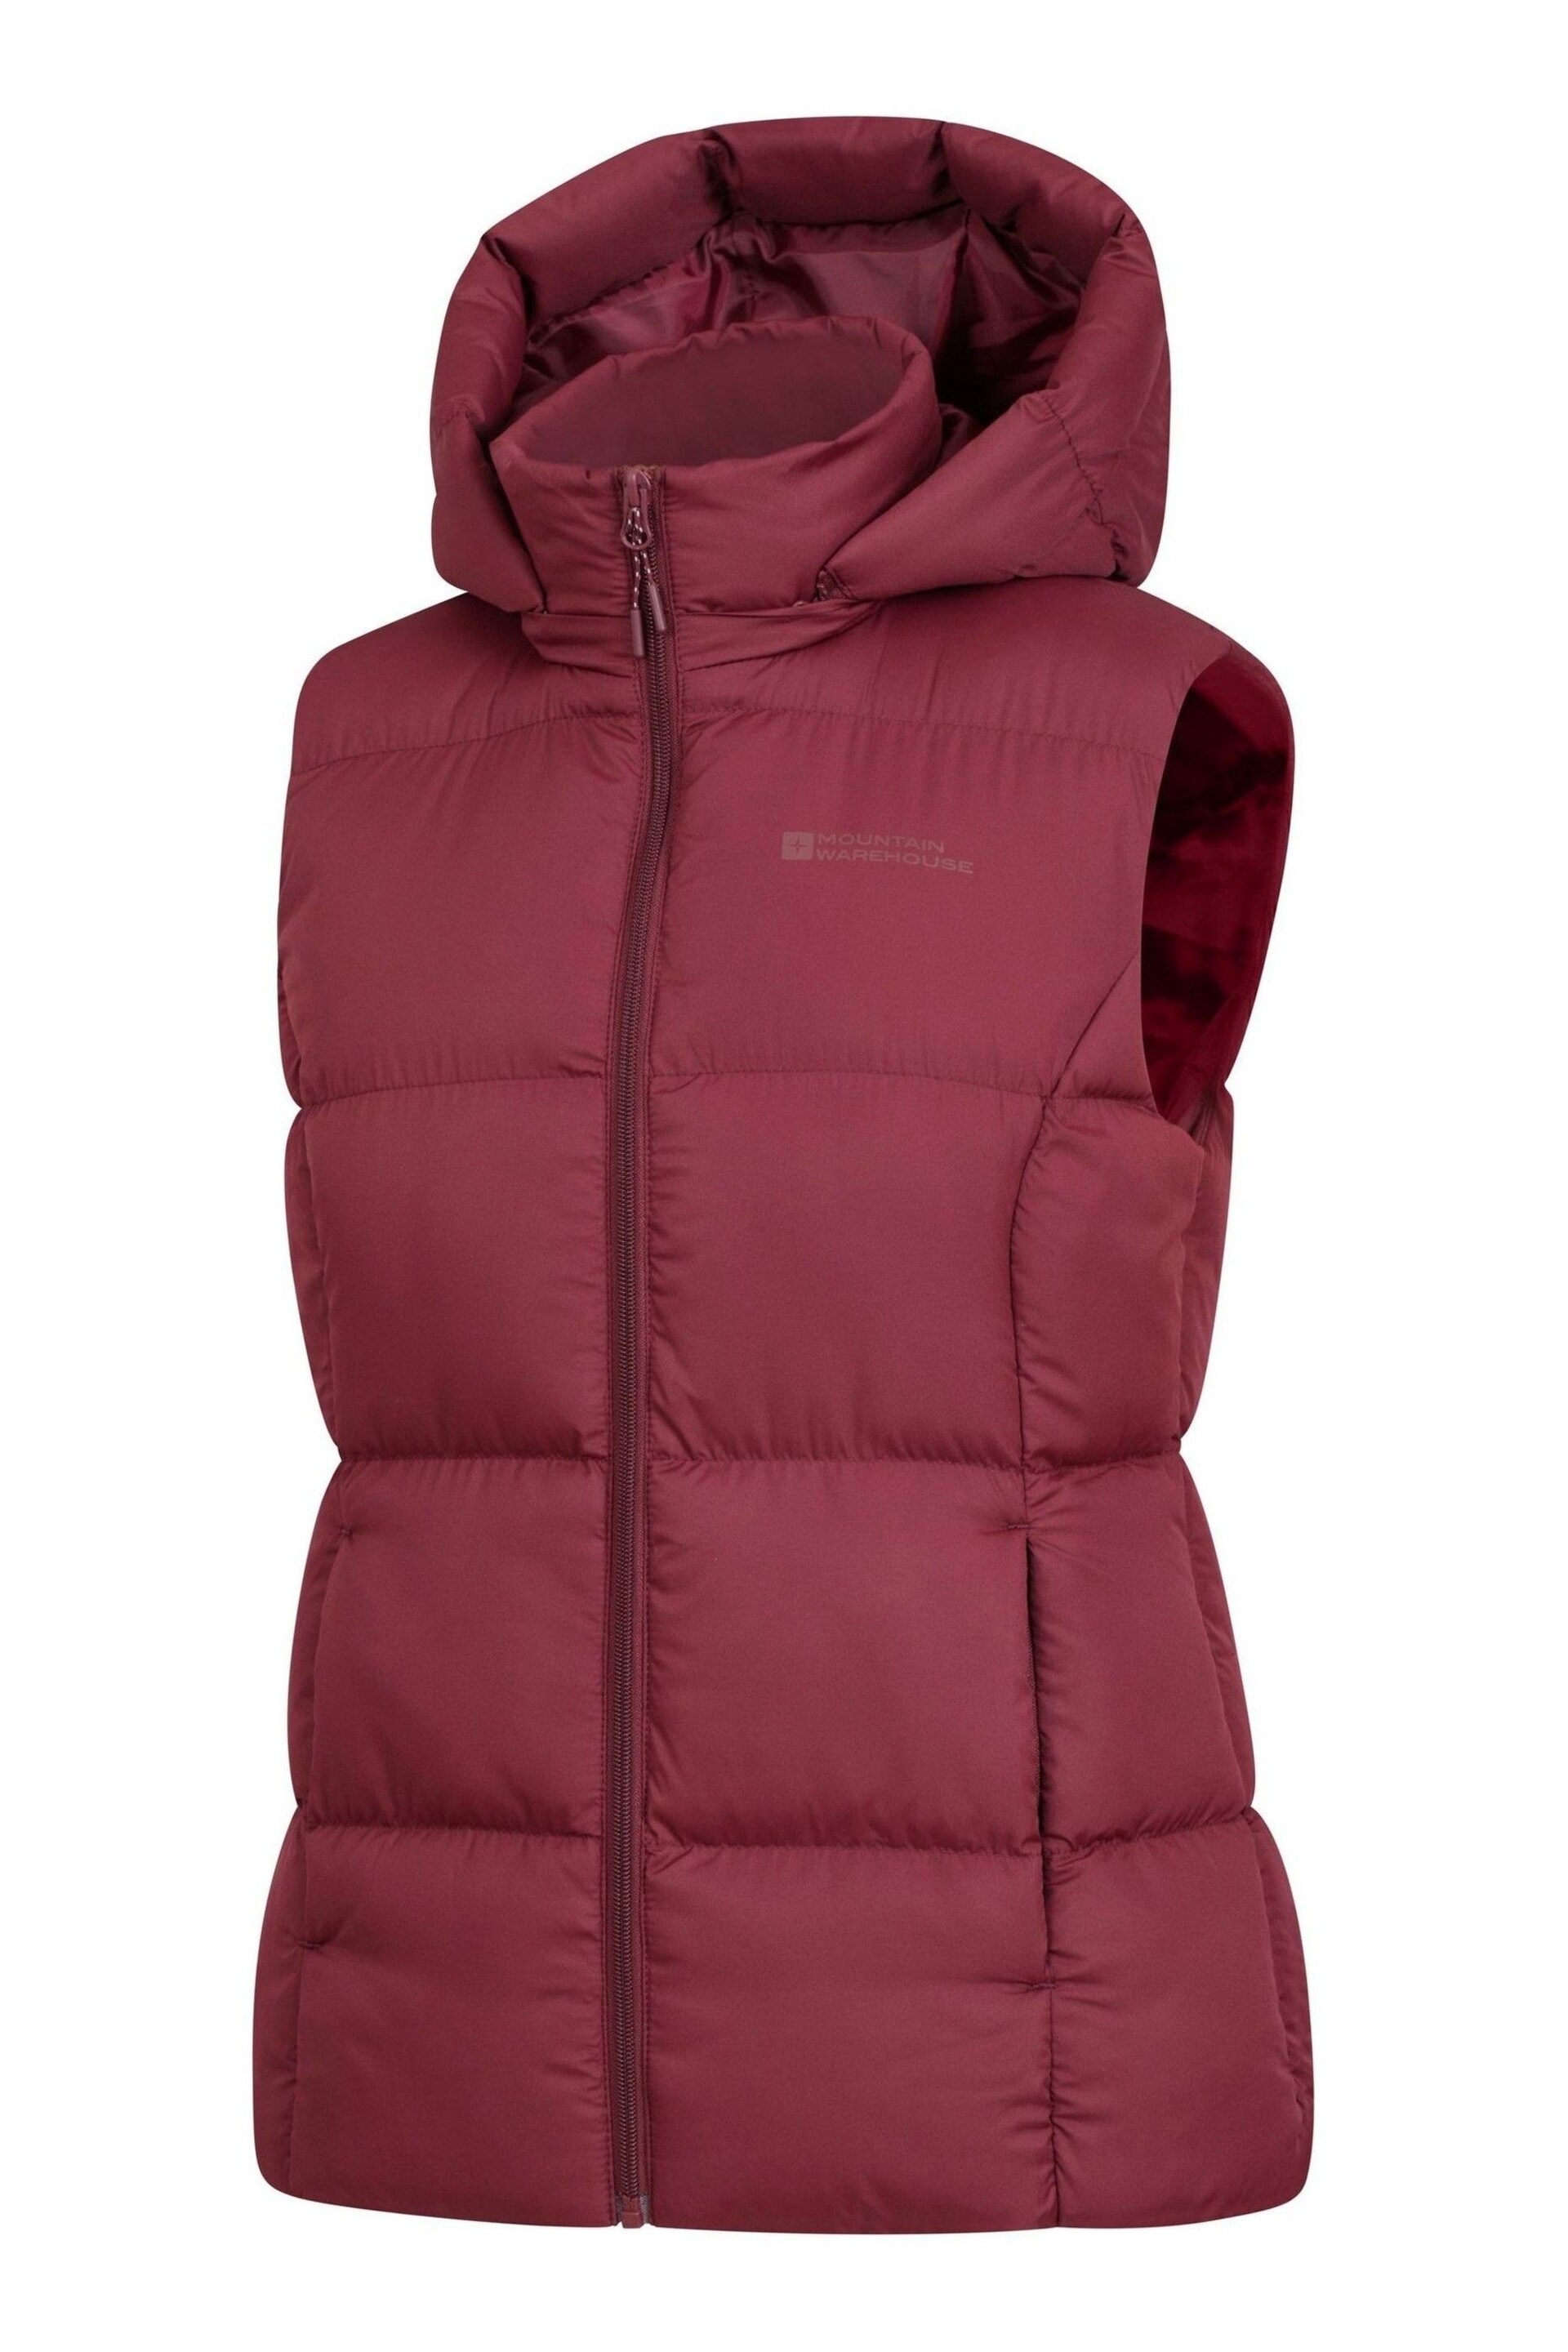 Mountain Warehouse Red Astral Womens Padded Gilet - Image 4 of 6